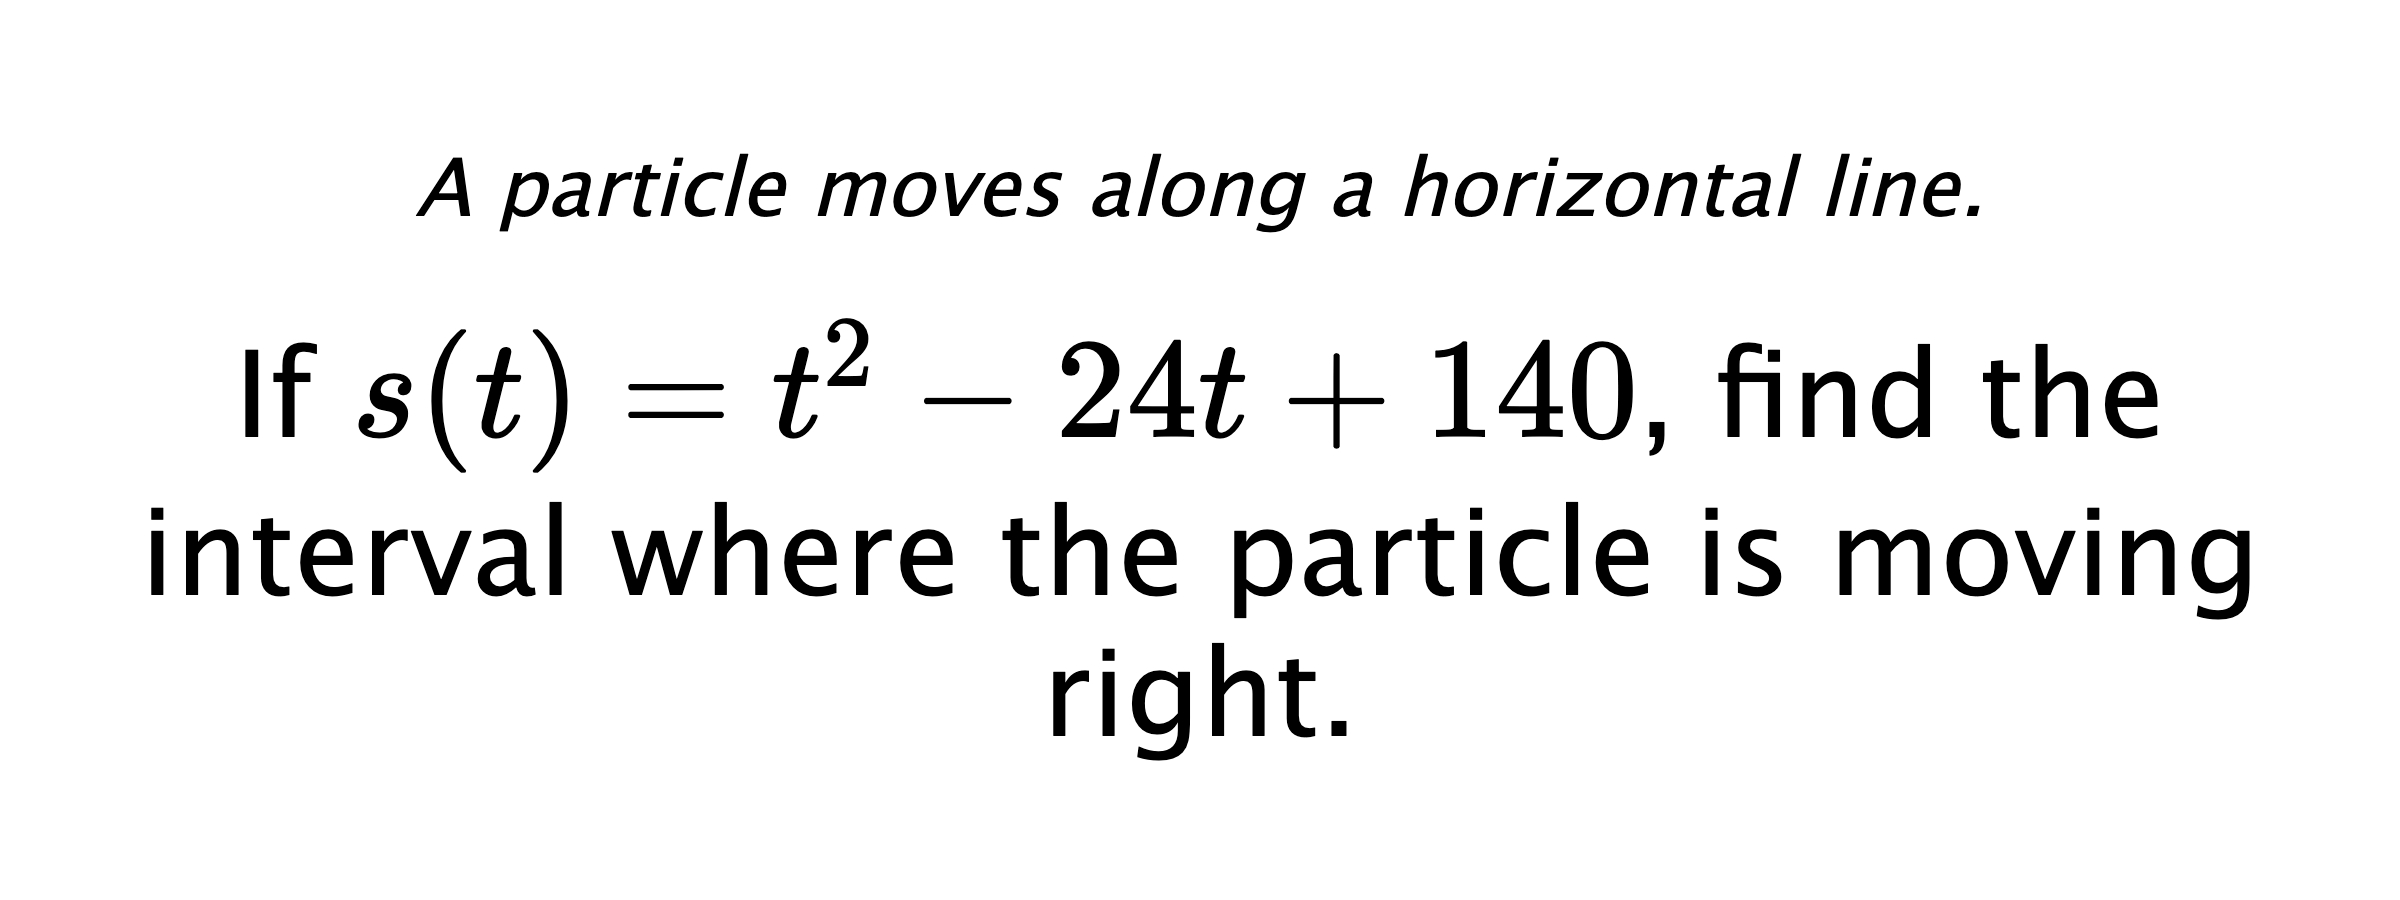 A particle moves along a horizontal line. If $ s(t)=t^2-24t+140 $, find the interval where the particle is moving right.